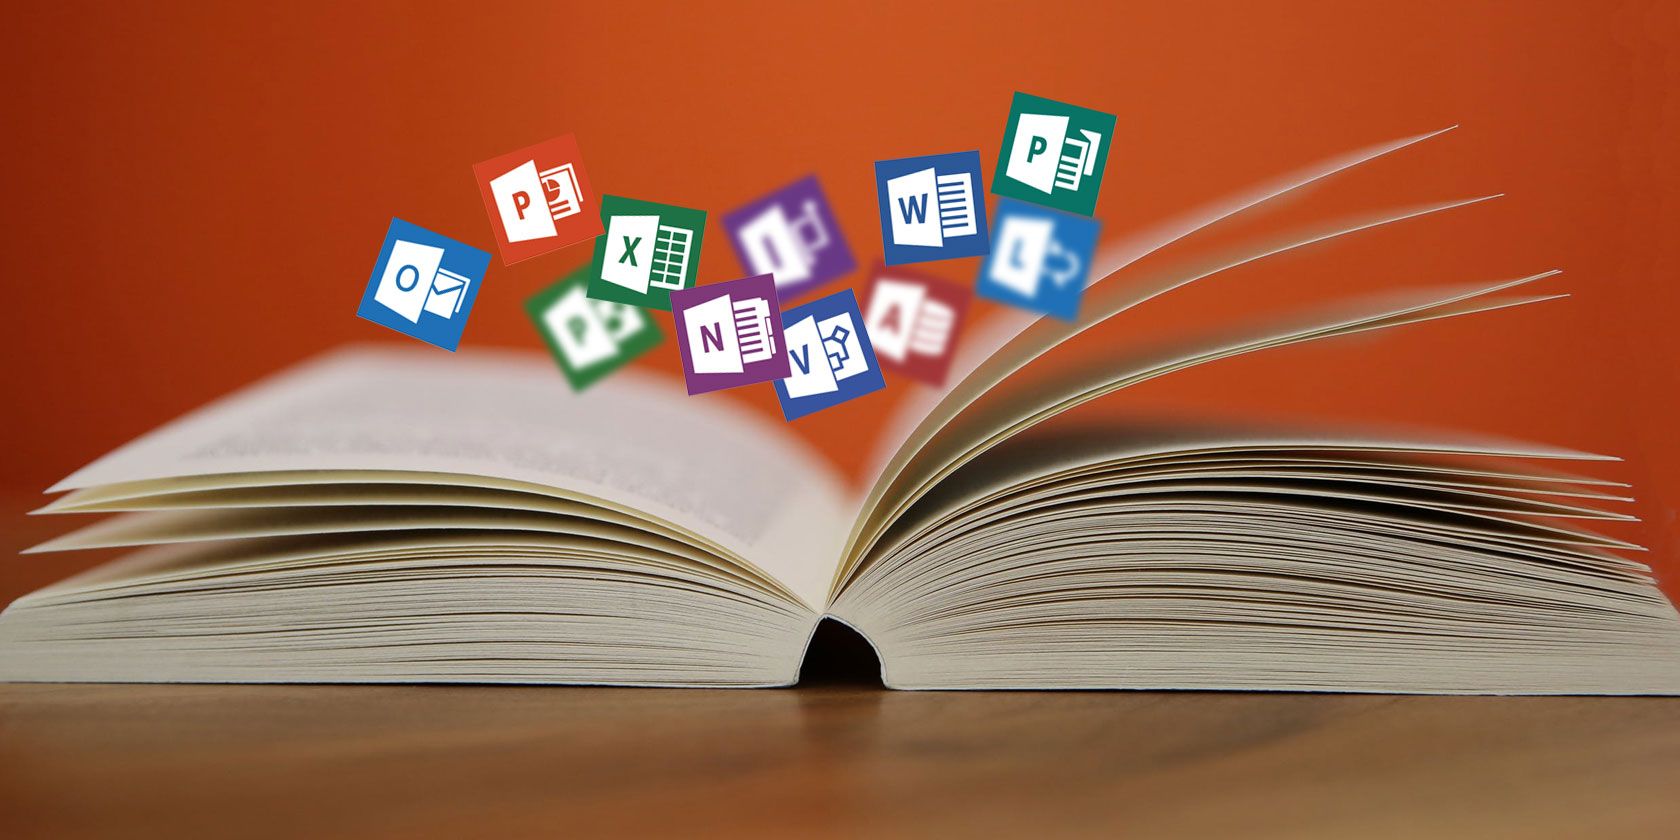 learn how to use microsoft office suite